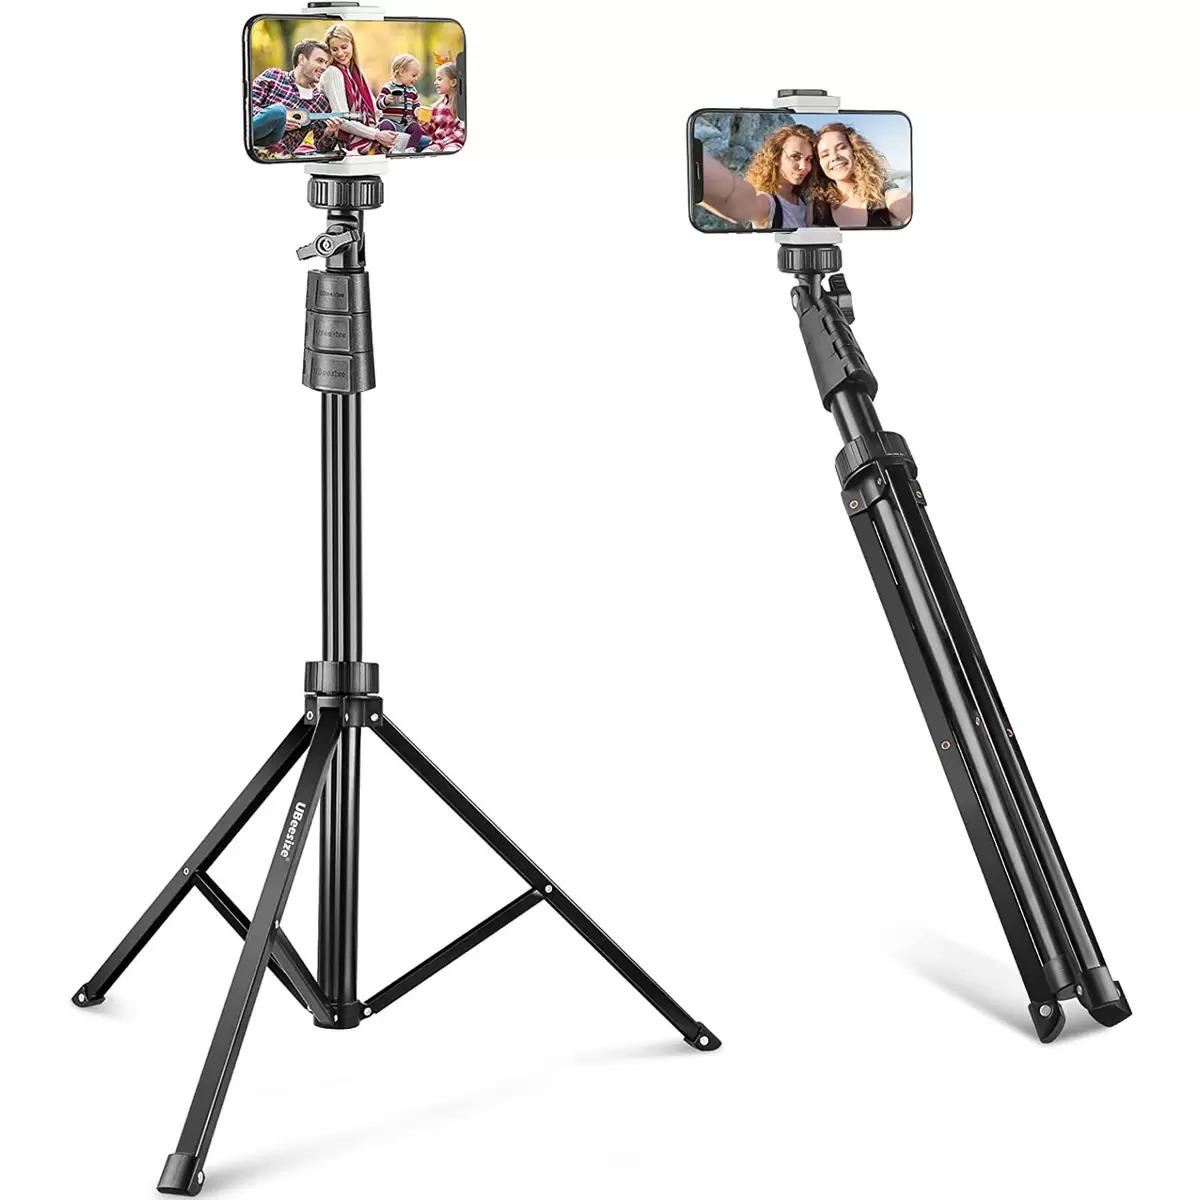 UBeesize 67in Aluminum Tripod Stand with Remote for $8.46